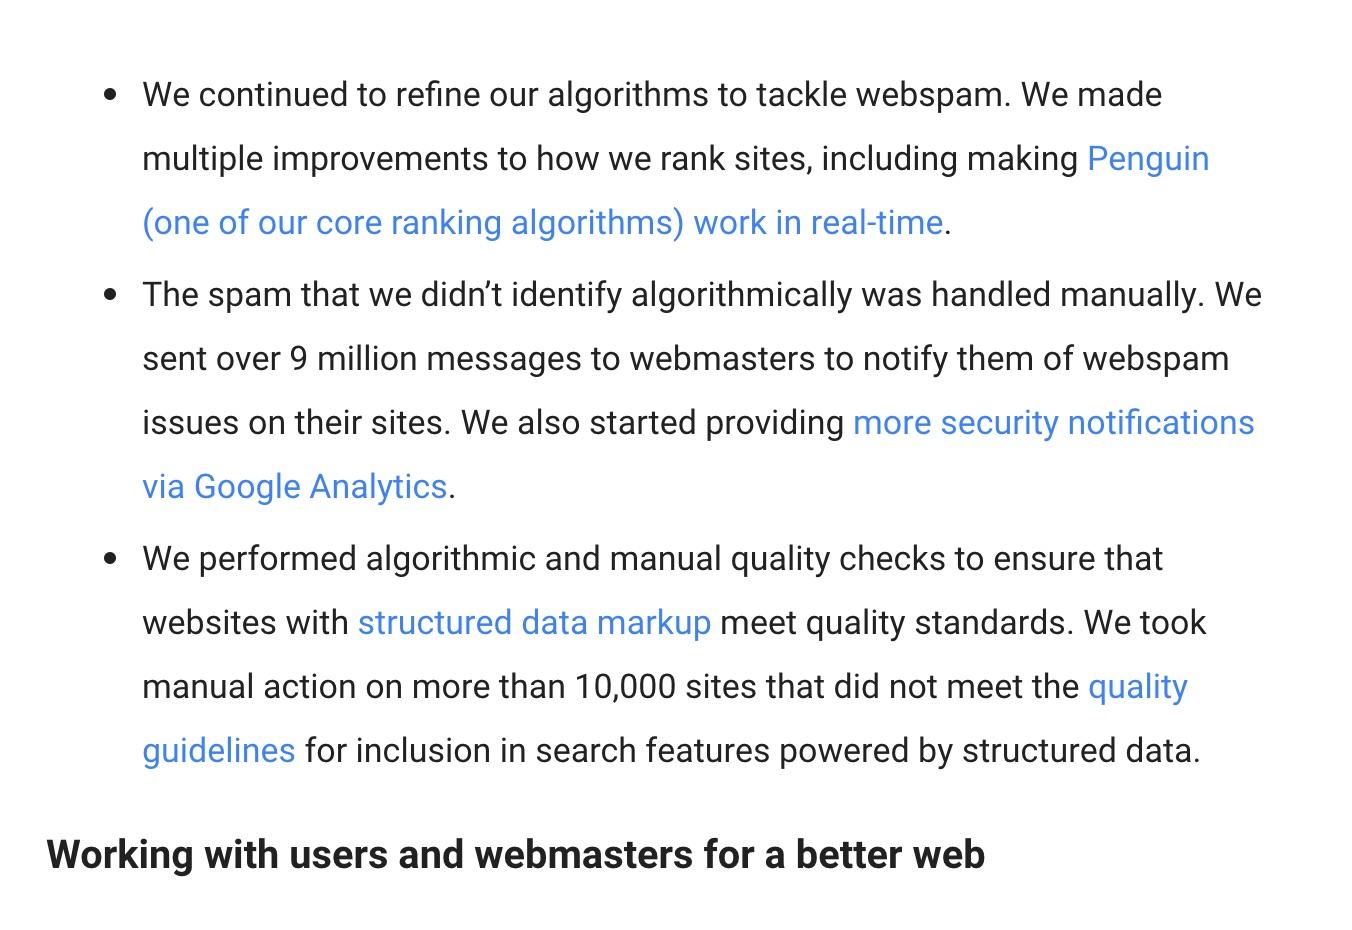 Example of using internal links in Google's Webmaster blog